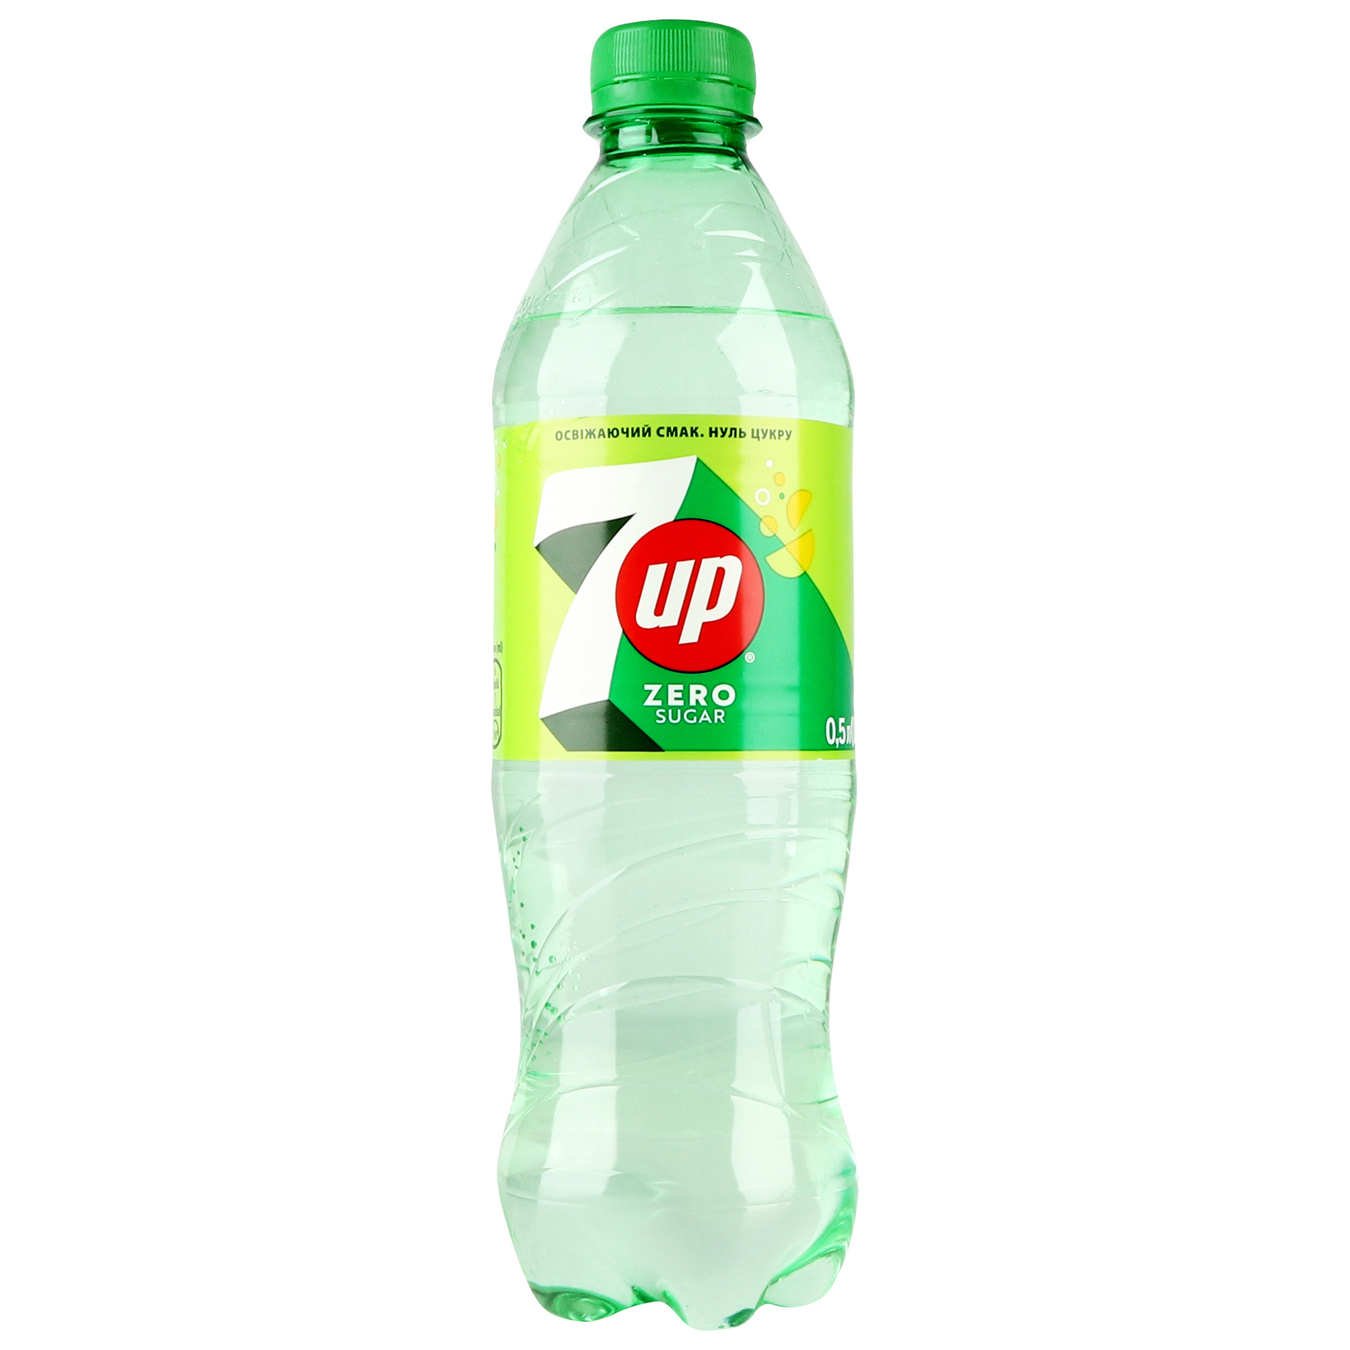 Carbonated drink 7 UP Free 0.5l